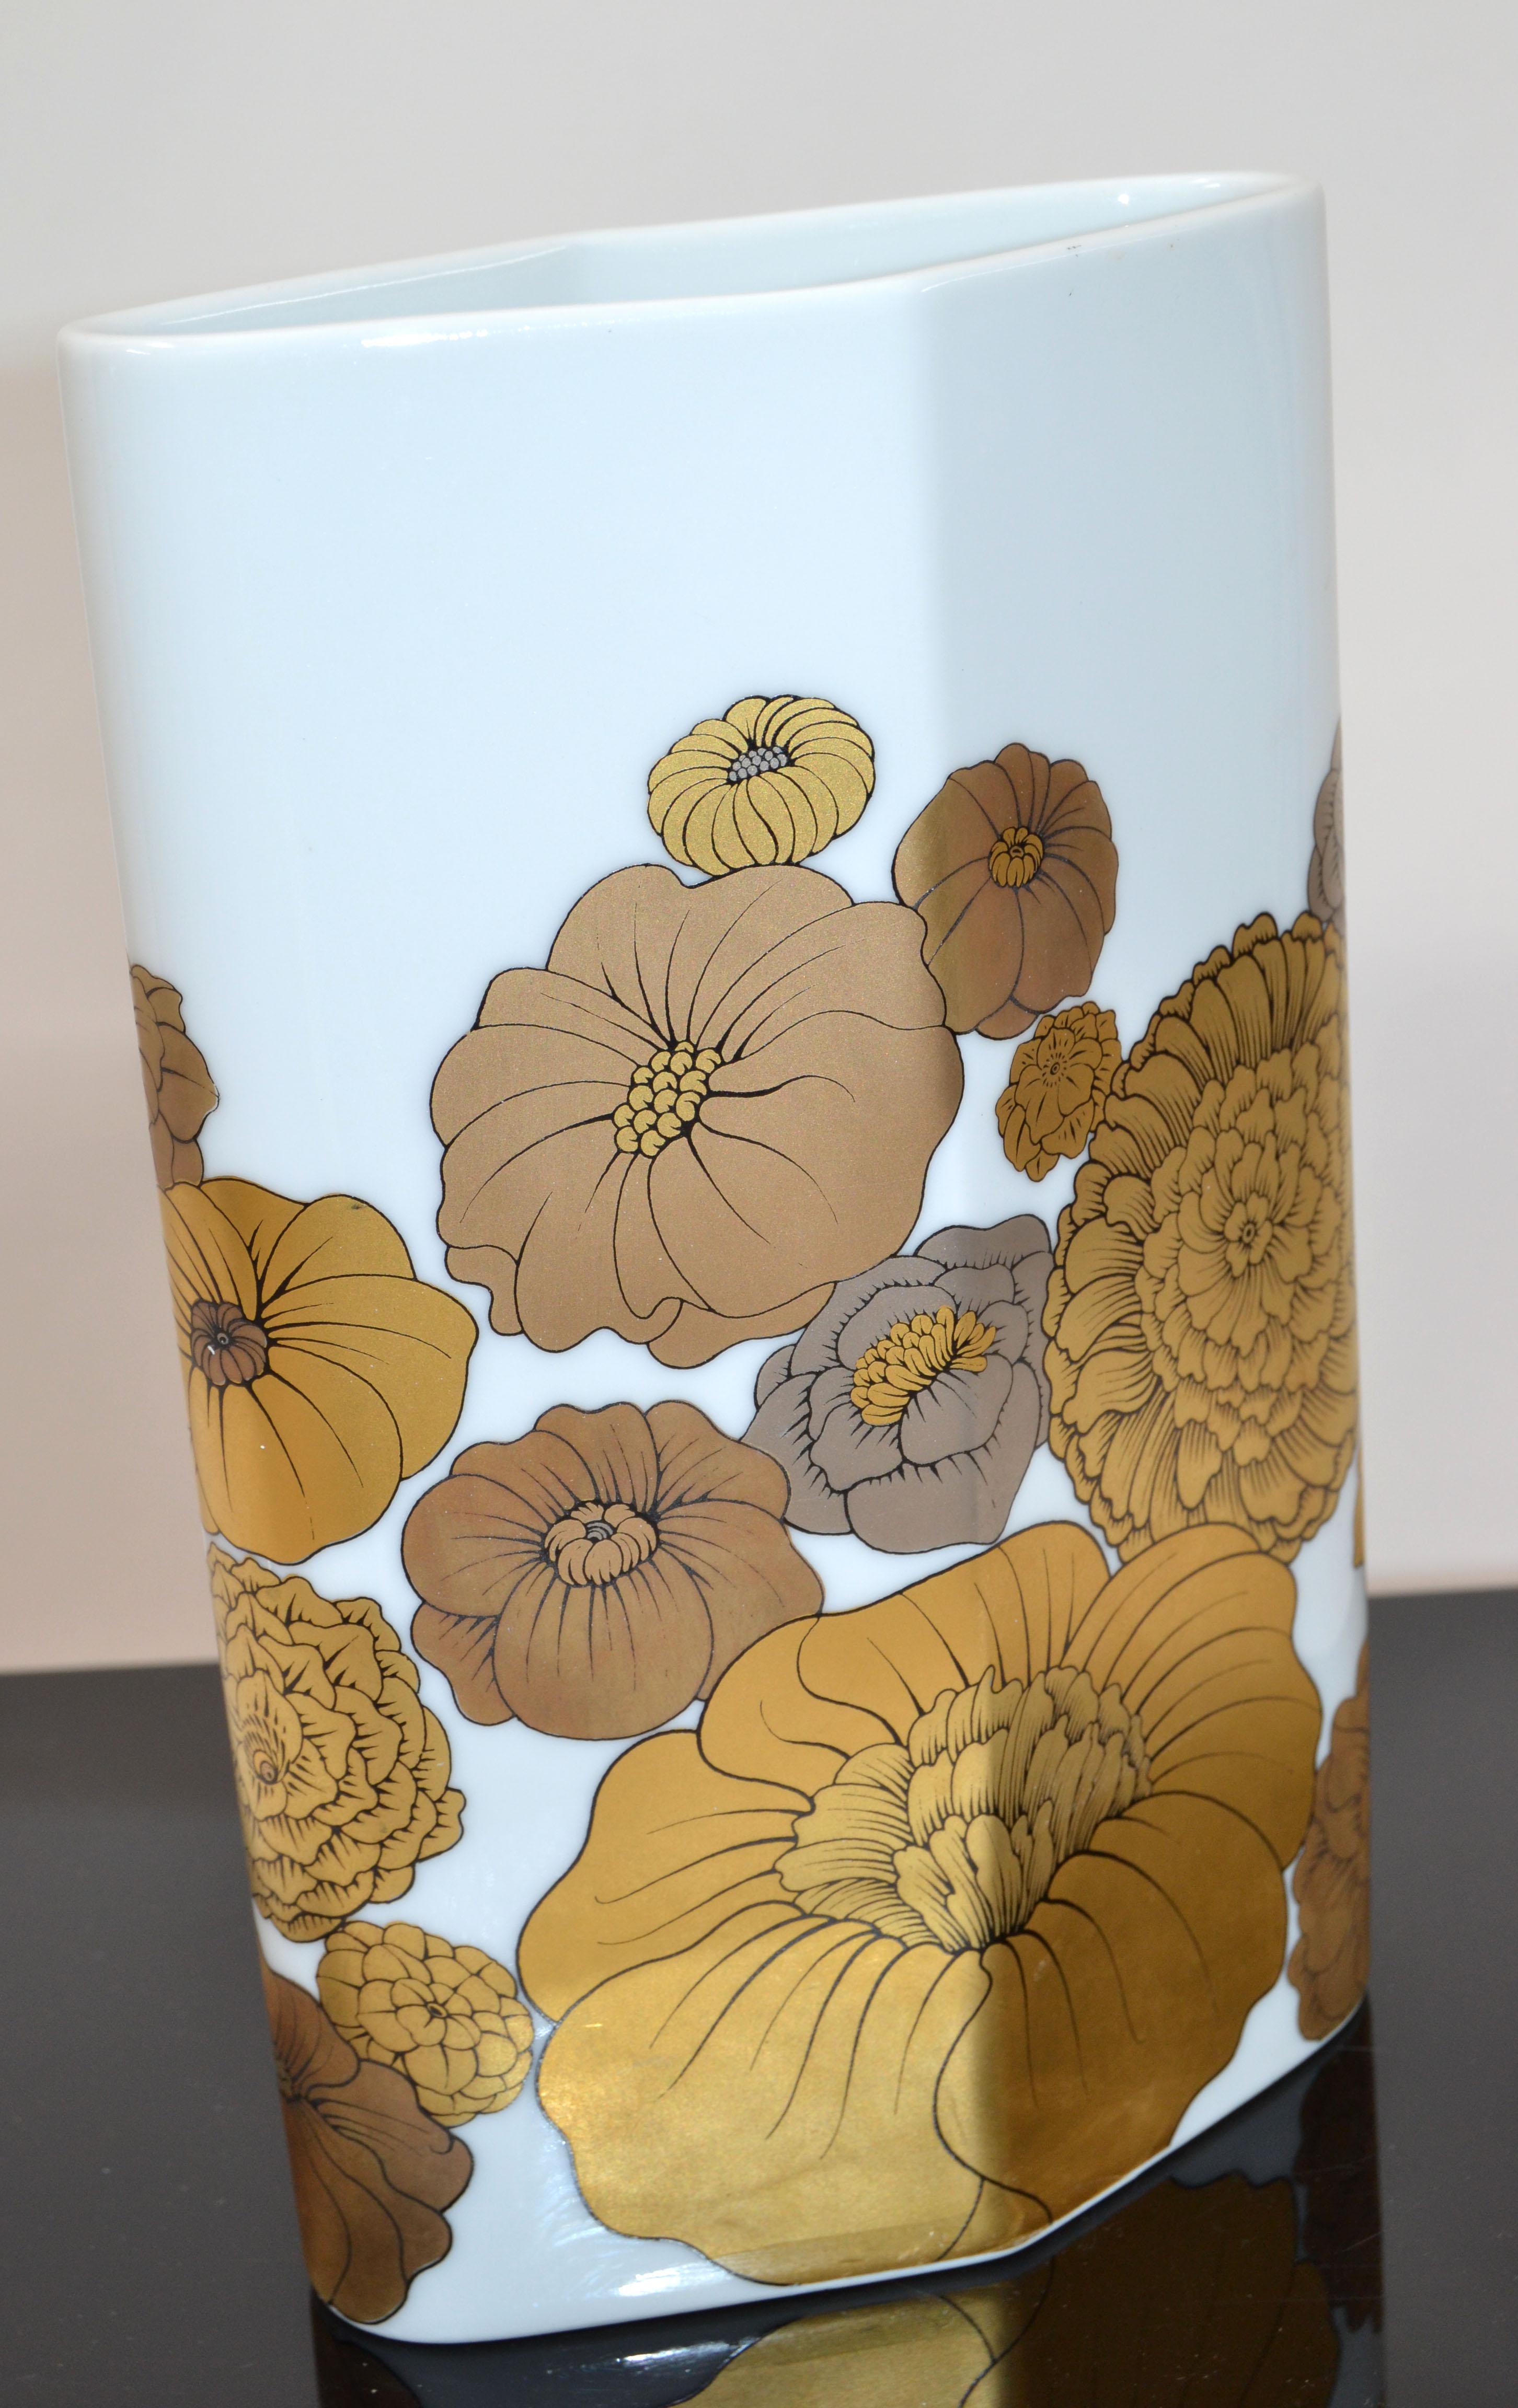 Hand-Painted Original Rosenthal Porcelain & Gold Vase Studio-Linie Germany by Wolfgang Bauer